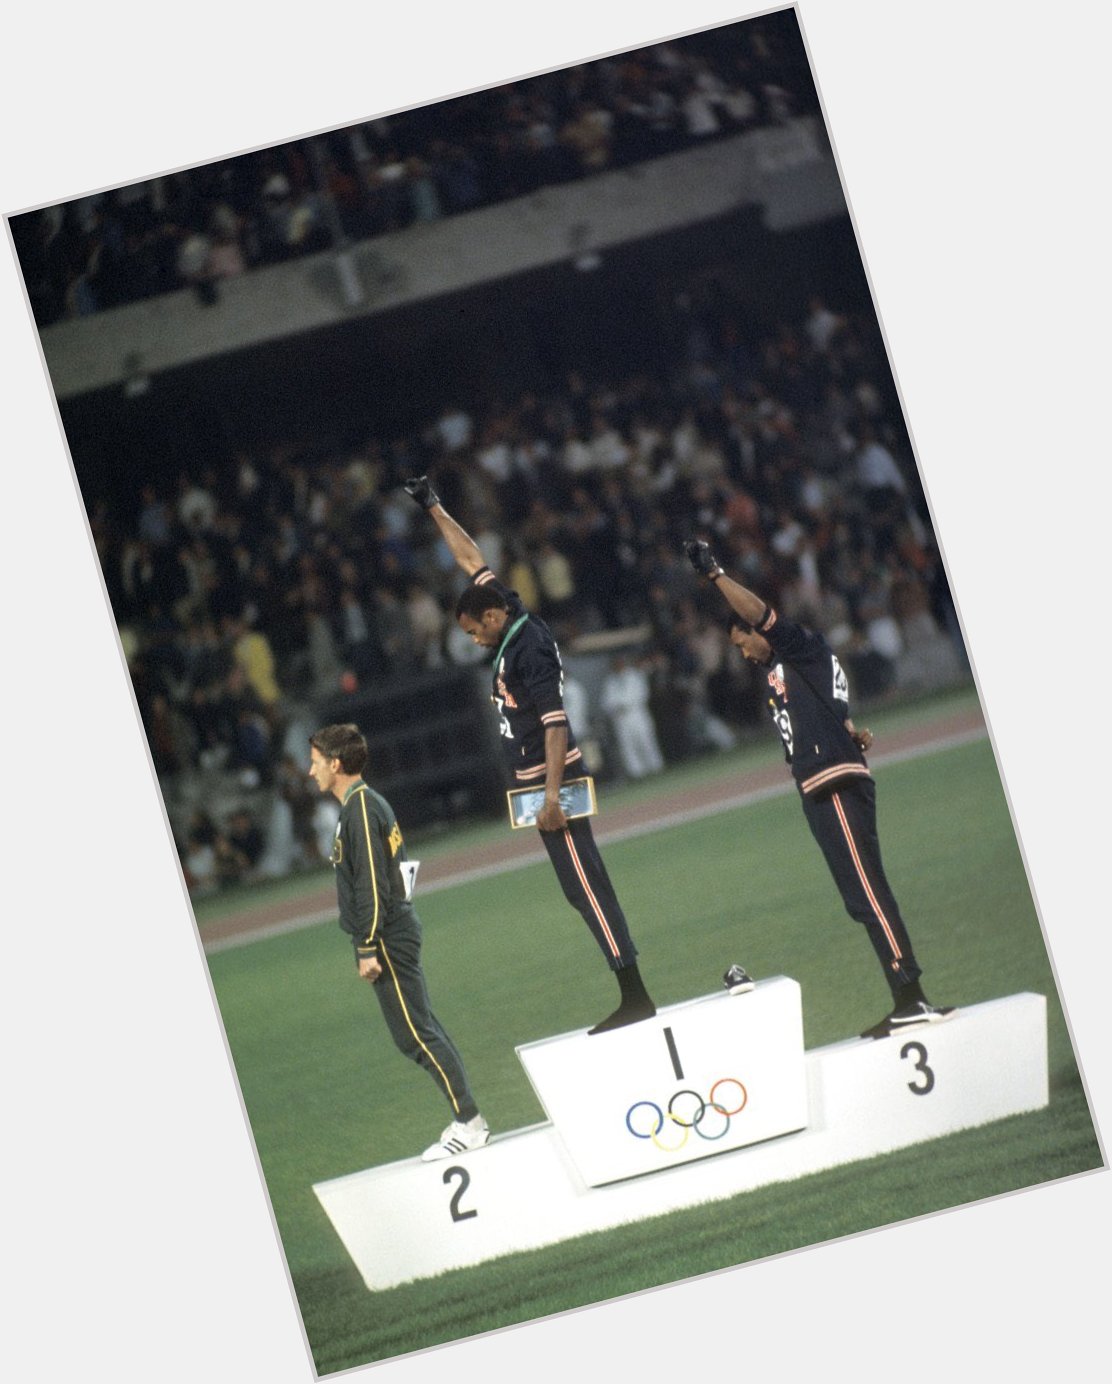 Happy birthday Peter Norman. 
You are a true Australian hero who deserves way more recognition and respect! 